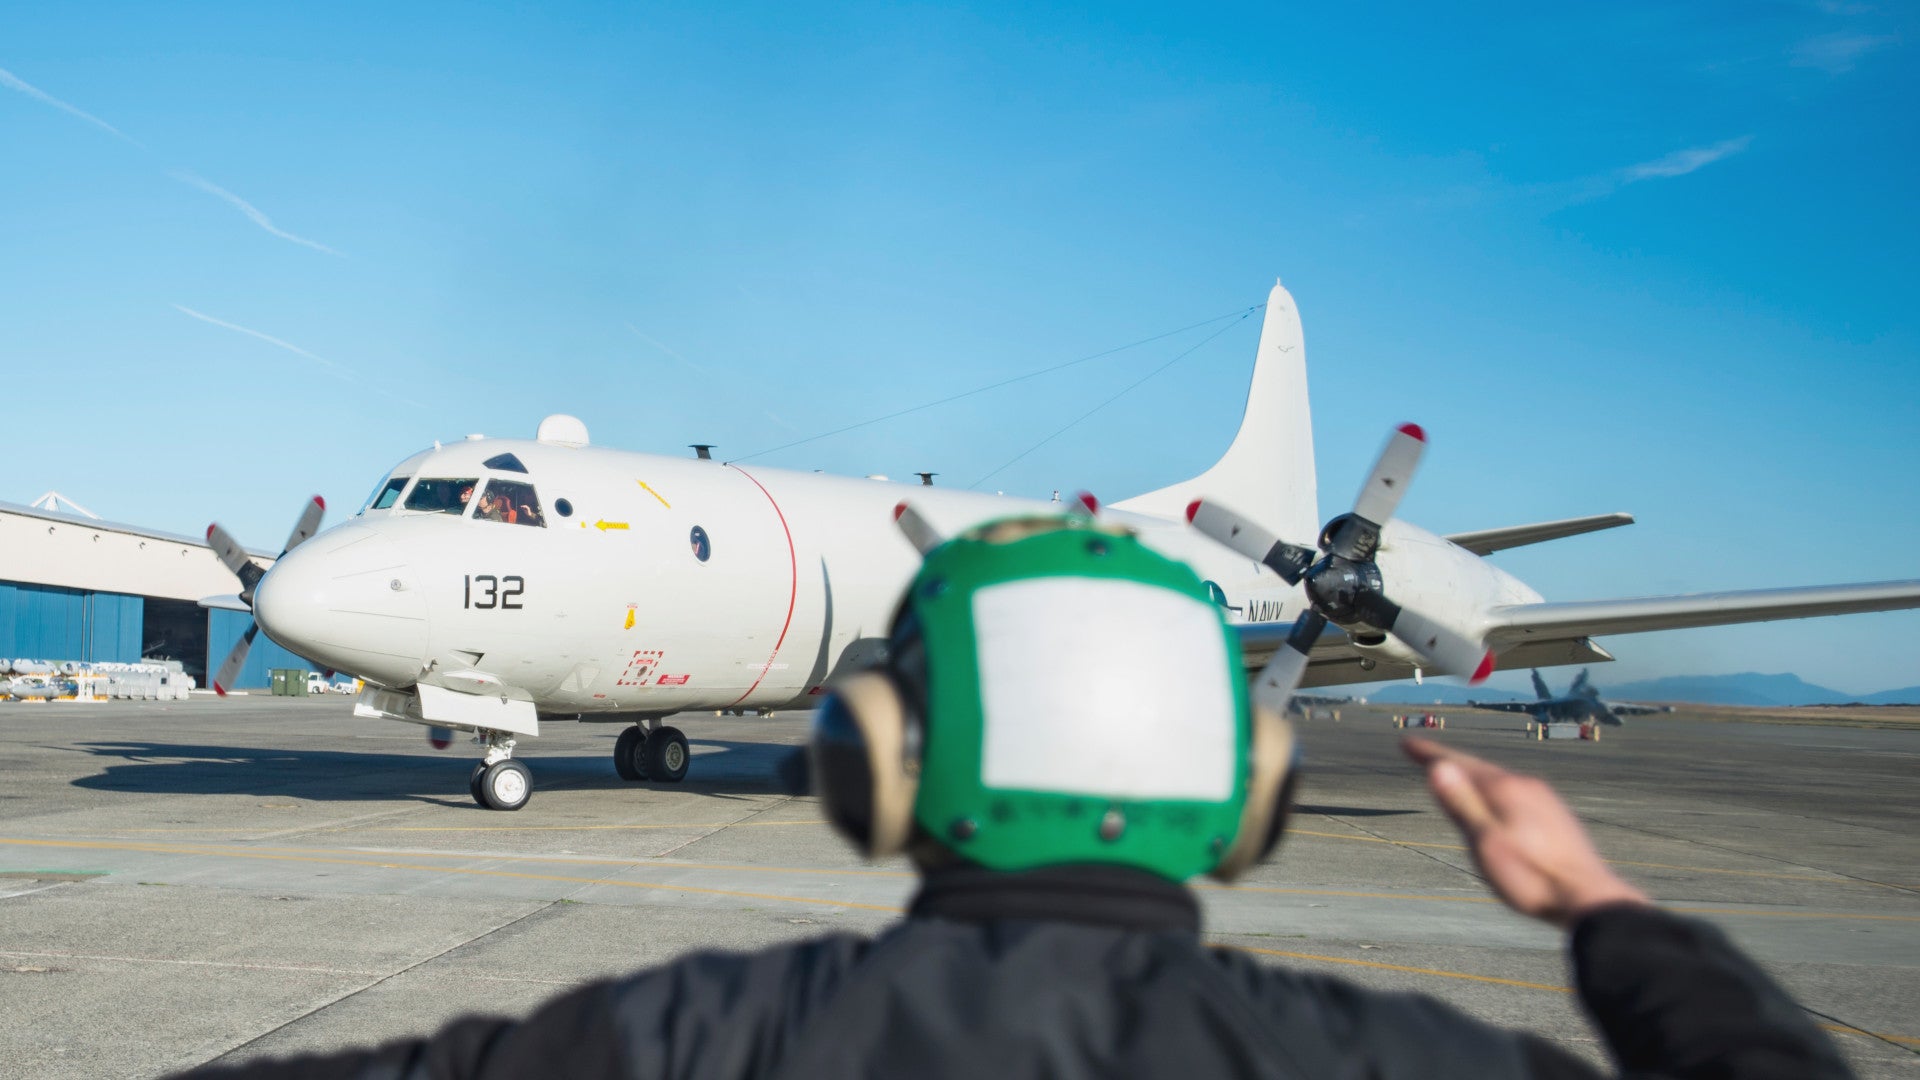 The Navy’s Last Active Duty P-3C Orion Squadron Is On Its Final Deployment